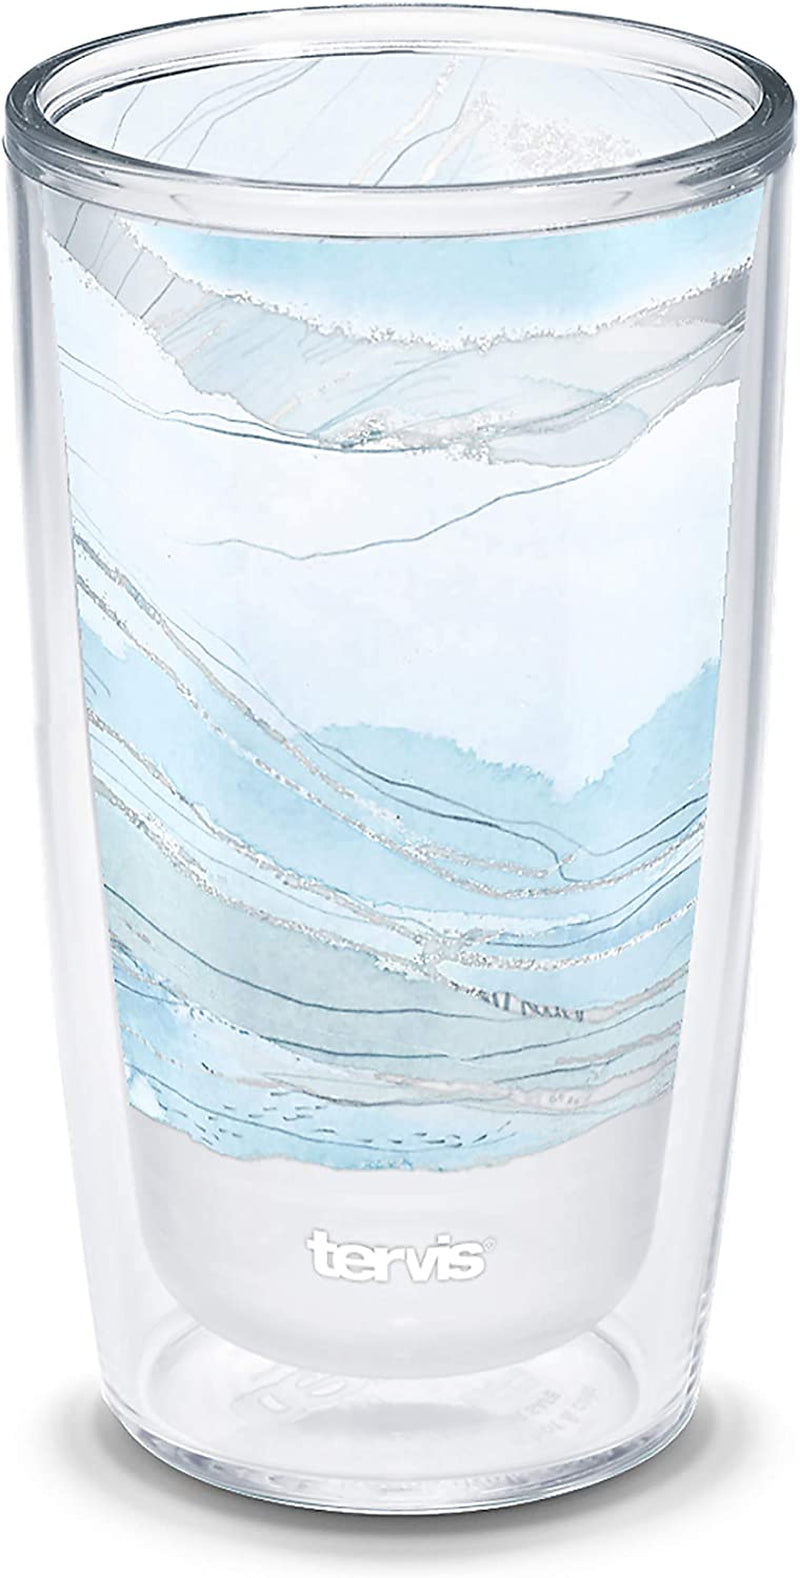 Tervis Made in USA Double Walled Kelly Ventura Insulated Tumbler Cup Keeps Drinks Cold & Hot, 16Oz 4Pk, Hillside